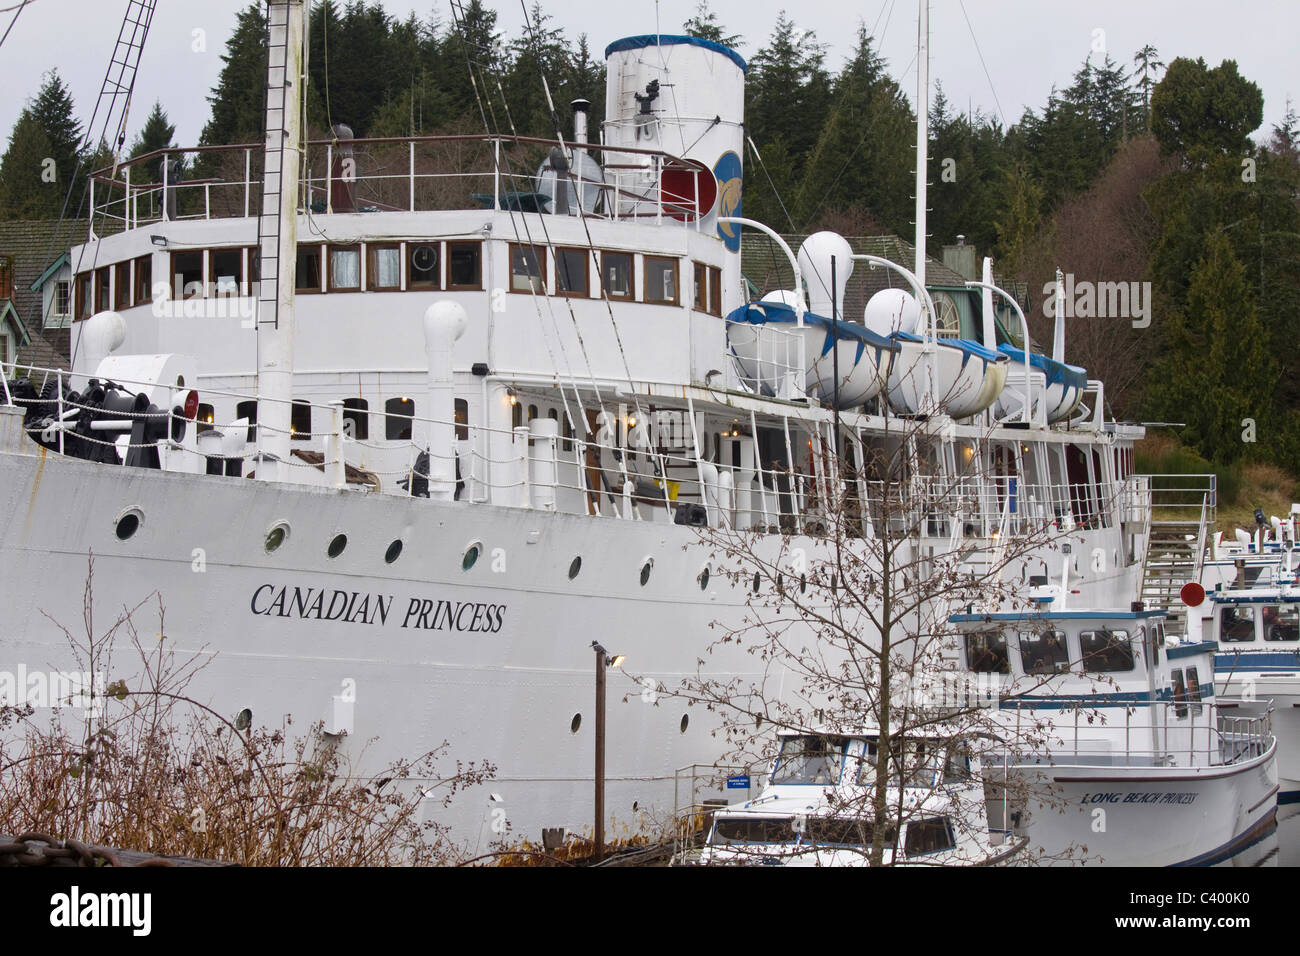 Canadian Princess docked in Ucluelet Harbour, Vancouver Island, British Columbia Stock Photo